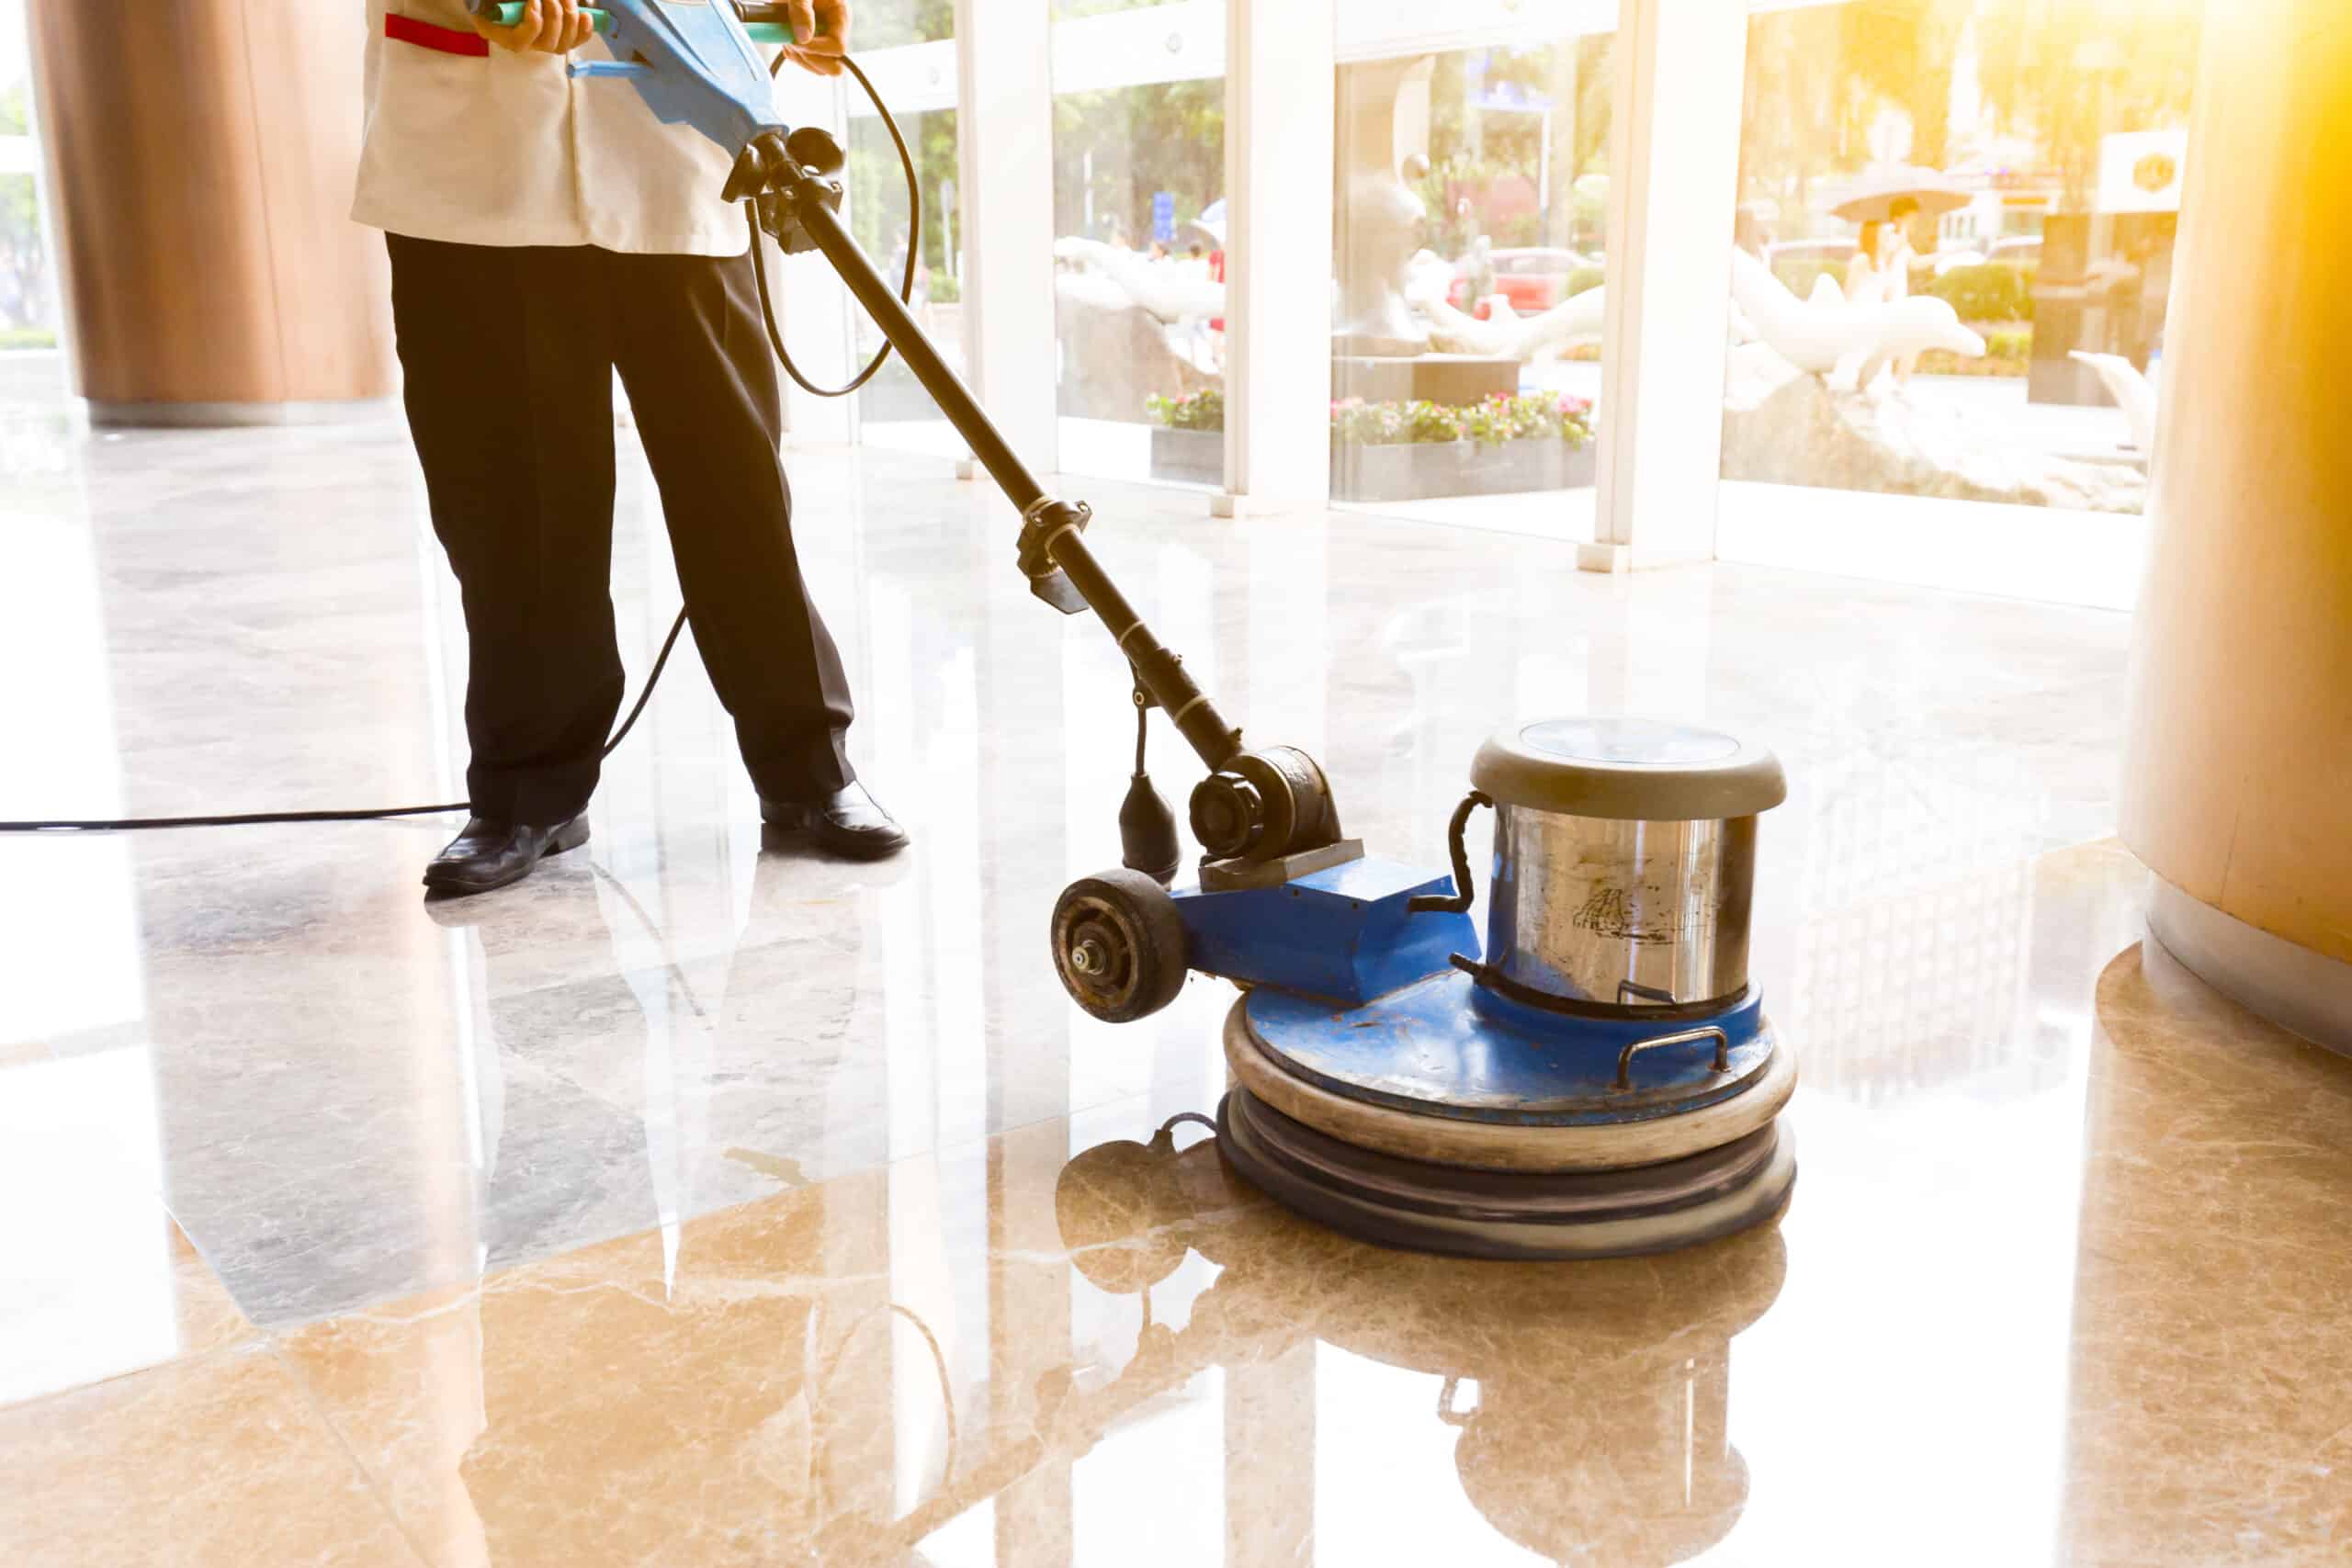 How to Clean Commercial Floors?